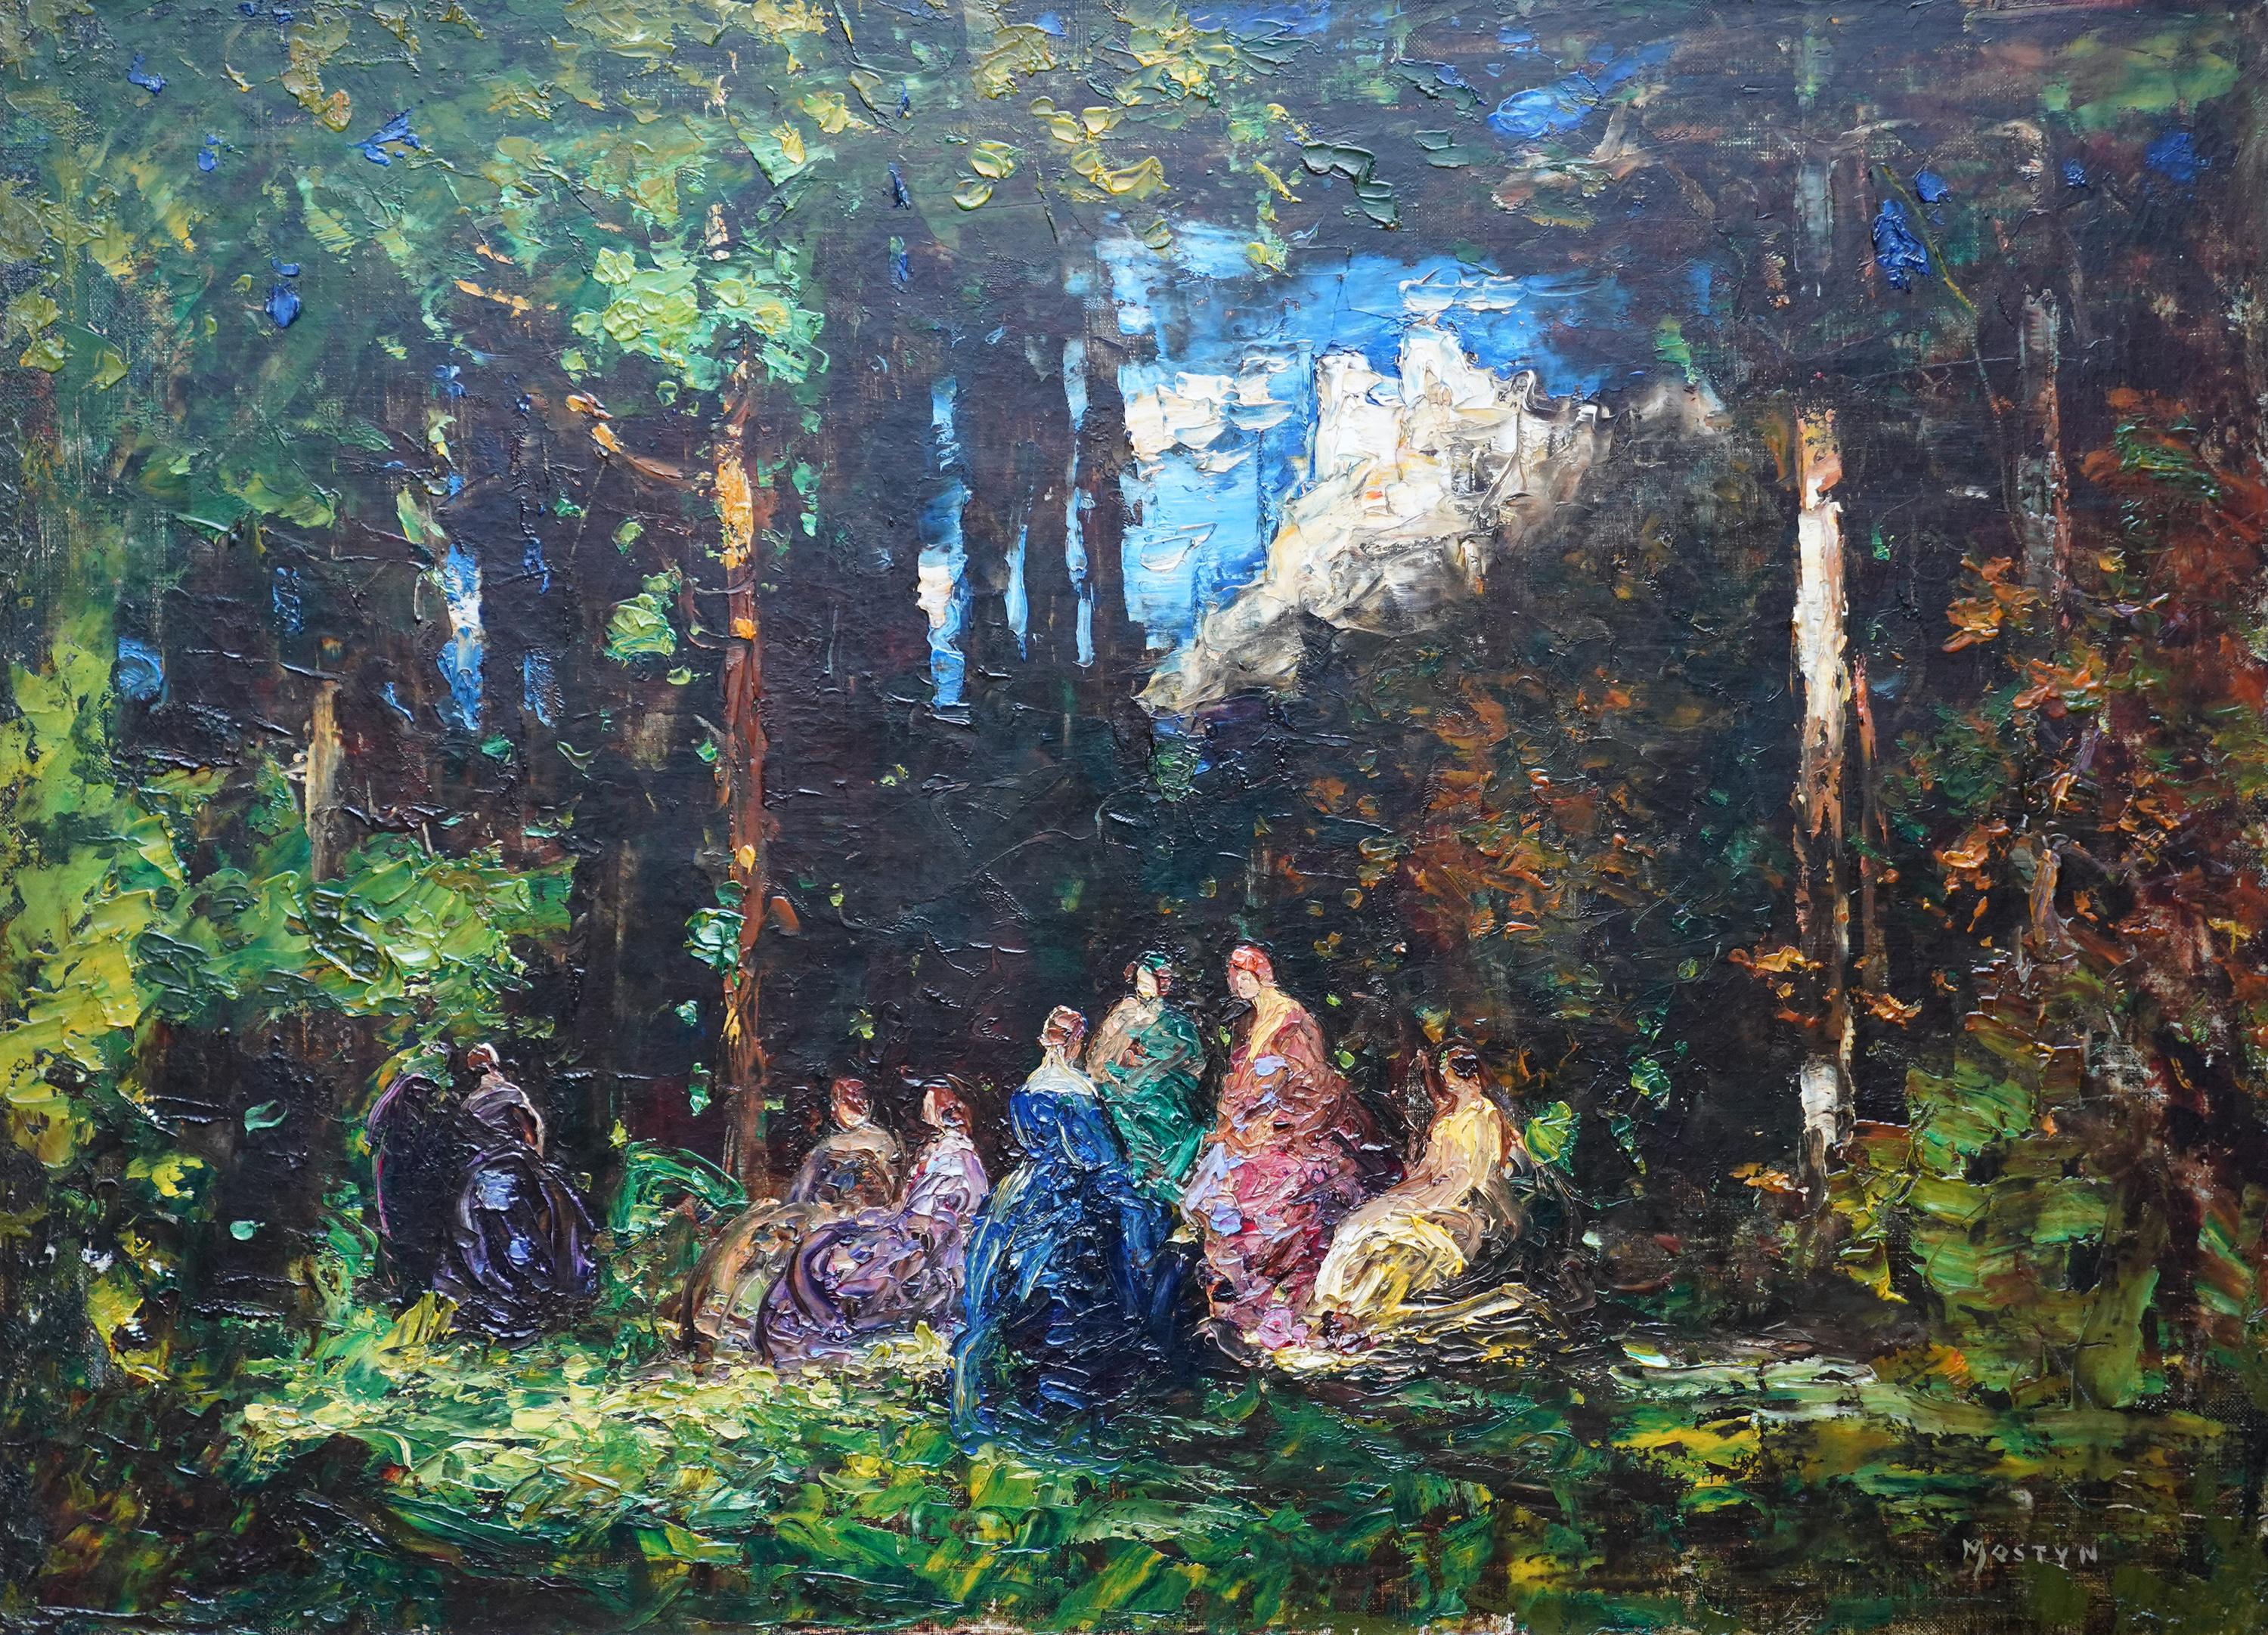 Elegant Ladies in a Woodland Clearing - British Edwardian landscape oil painting 2